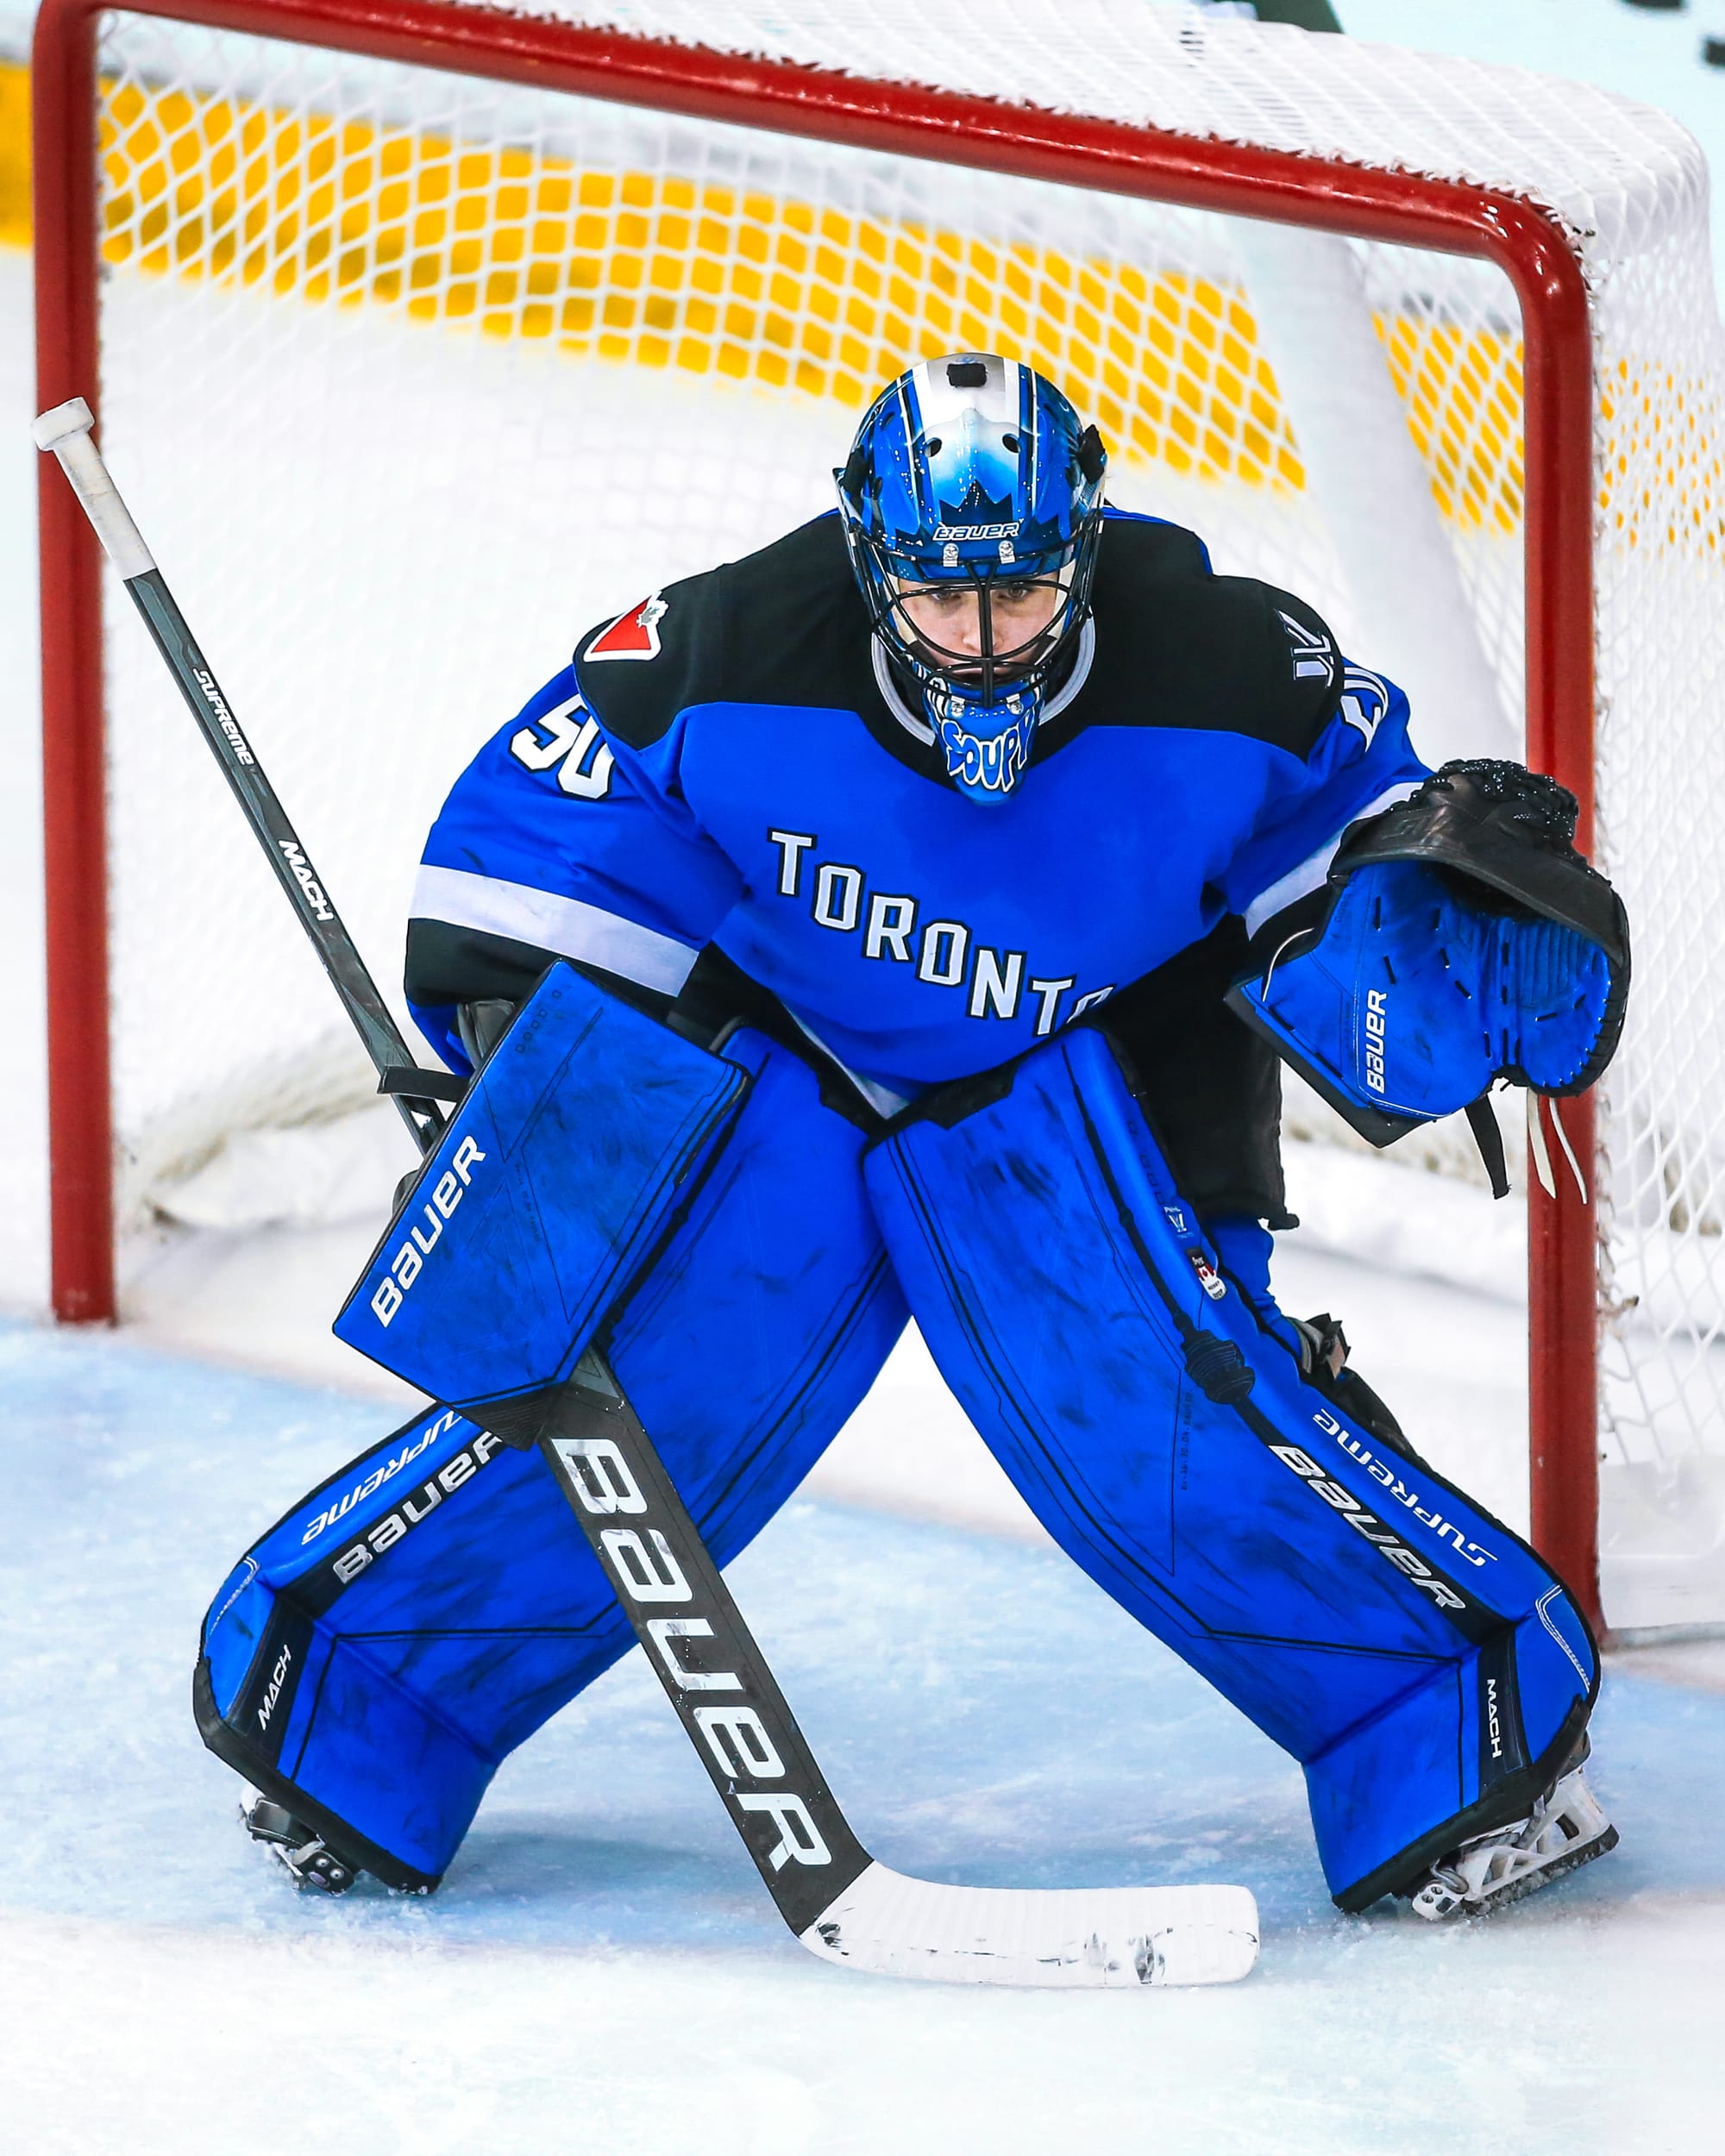 Kristen Campbell prepares to make a save against Boston. She is crouched down with her glove up and ready. She is wearing her blue pads and mask along with her blue home uniform.